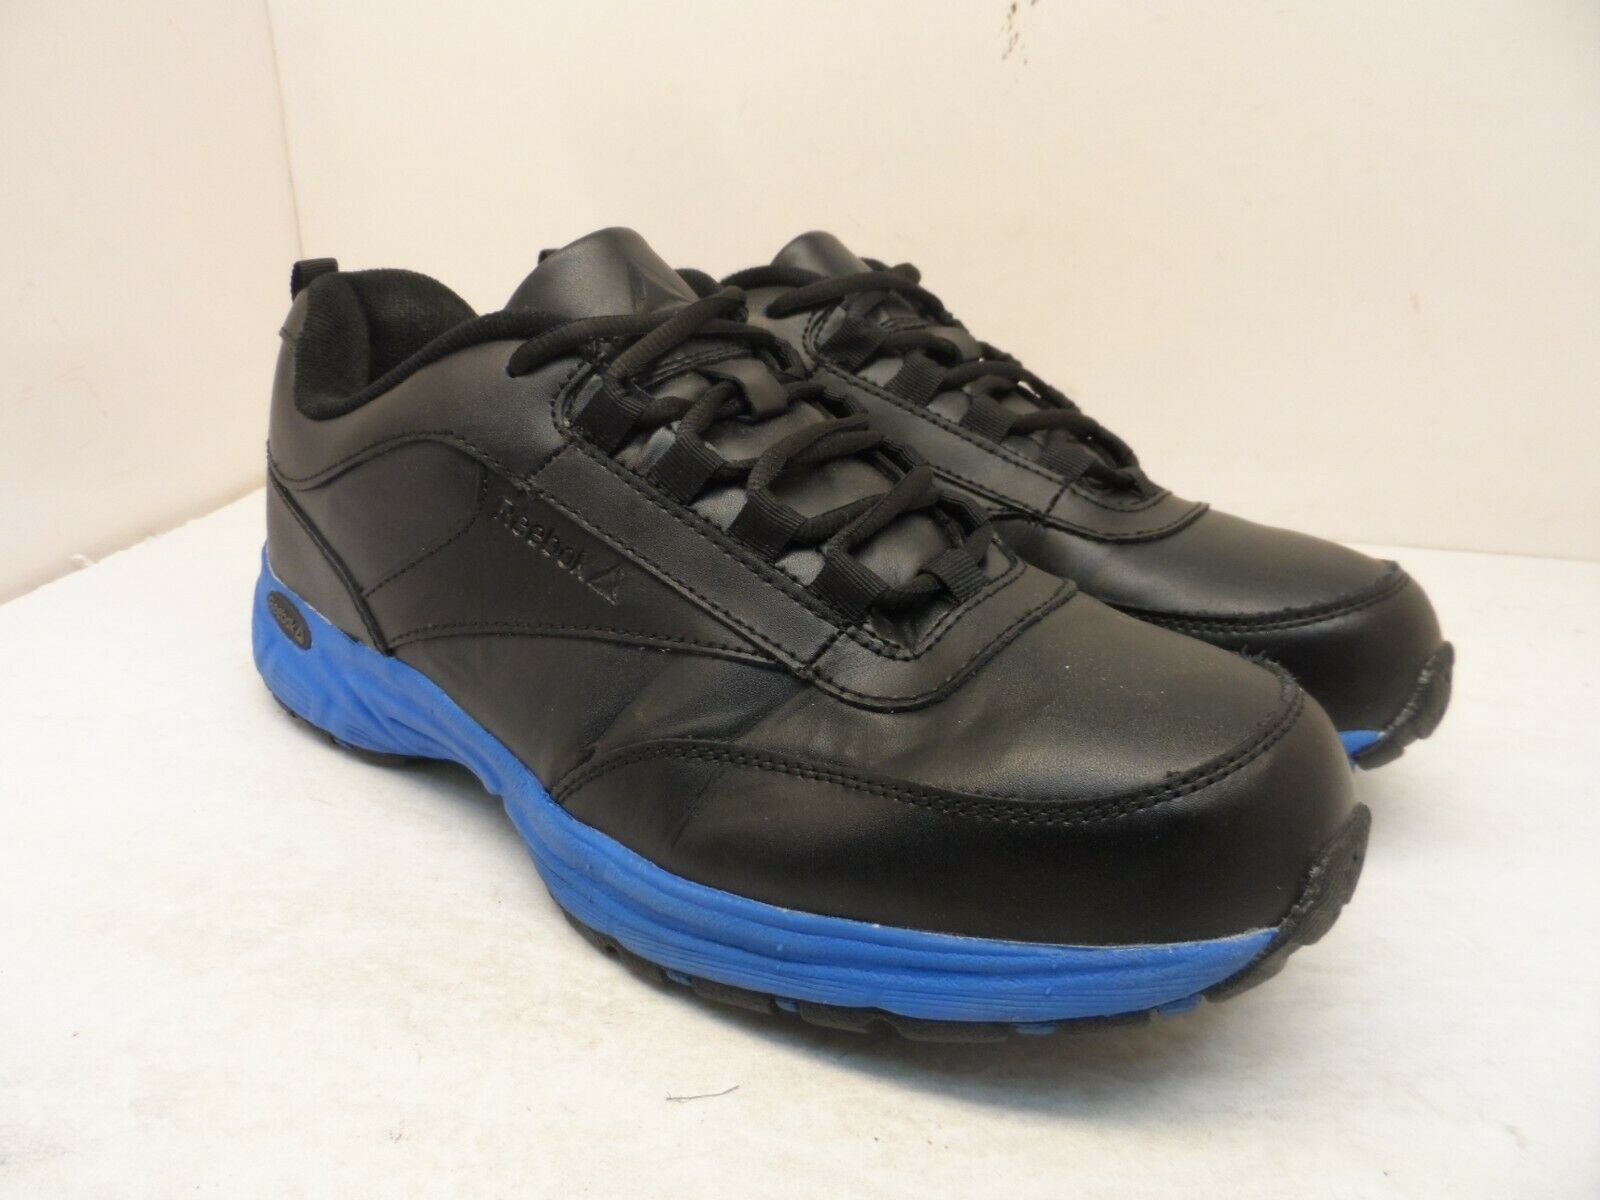 Primary image for Reebok Work Boy's Ateron Cross Trainer Work Shoes Black/Blue Leather Size 6M